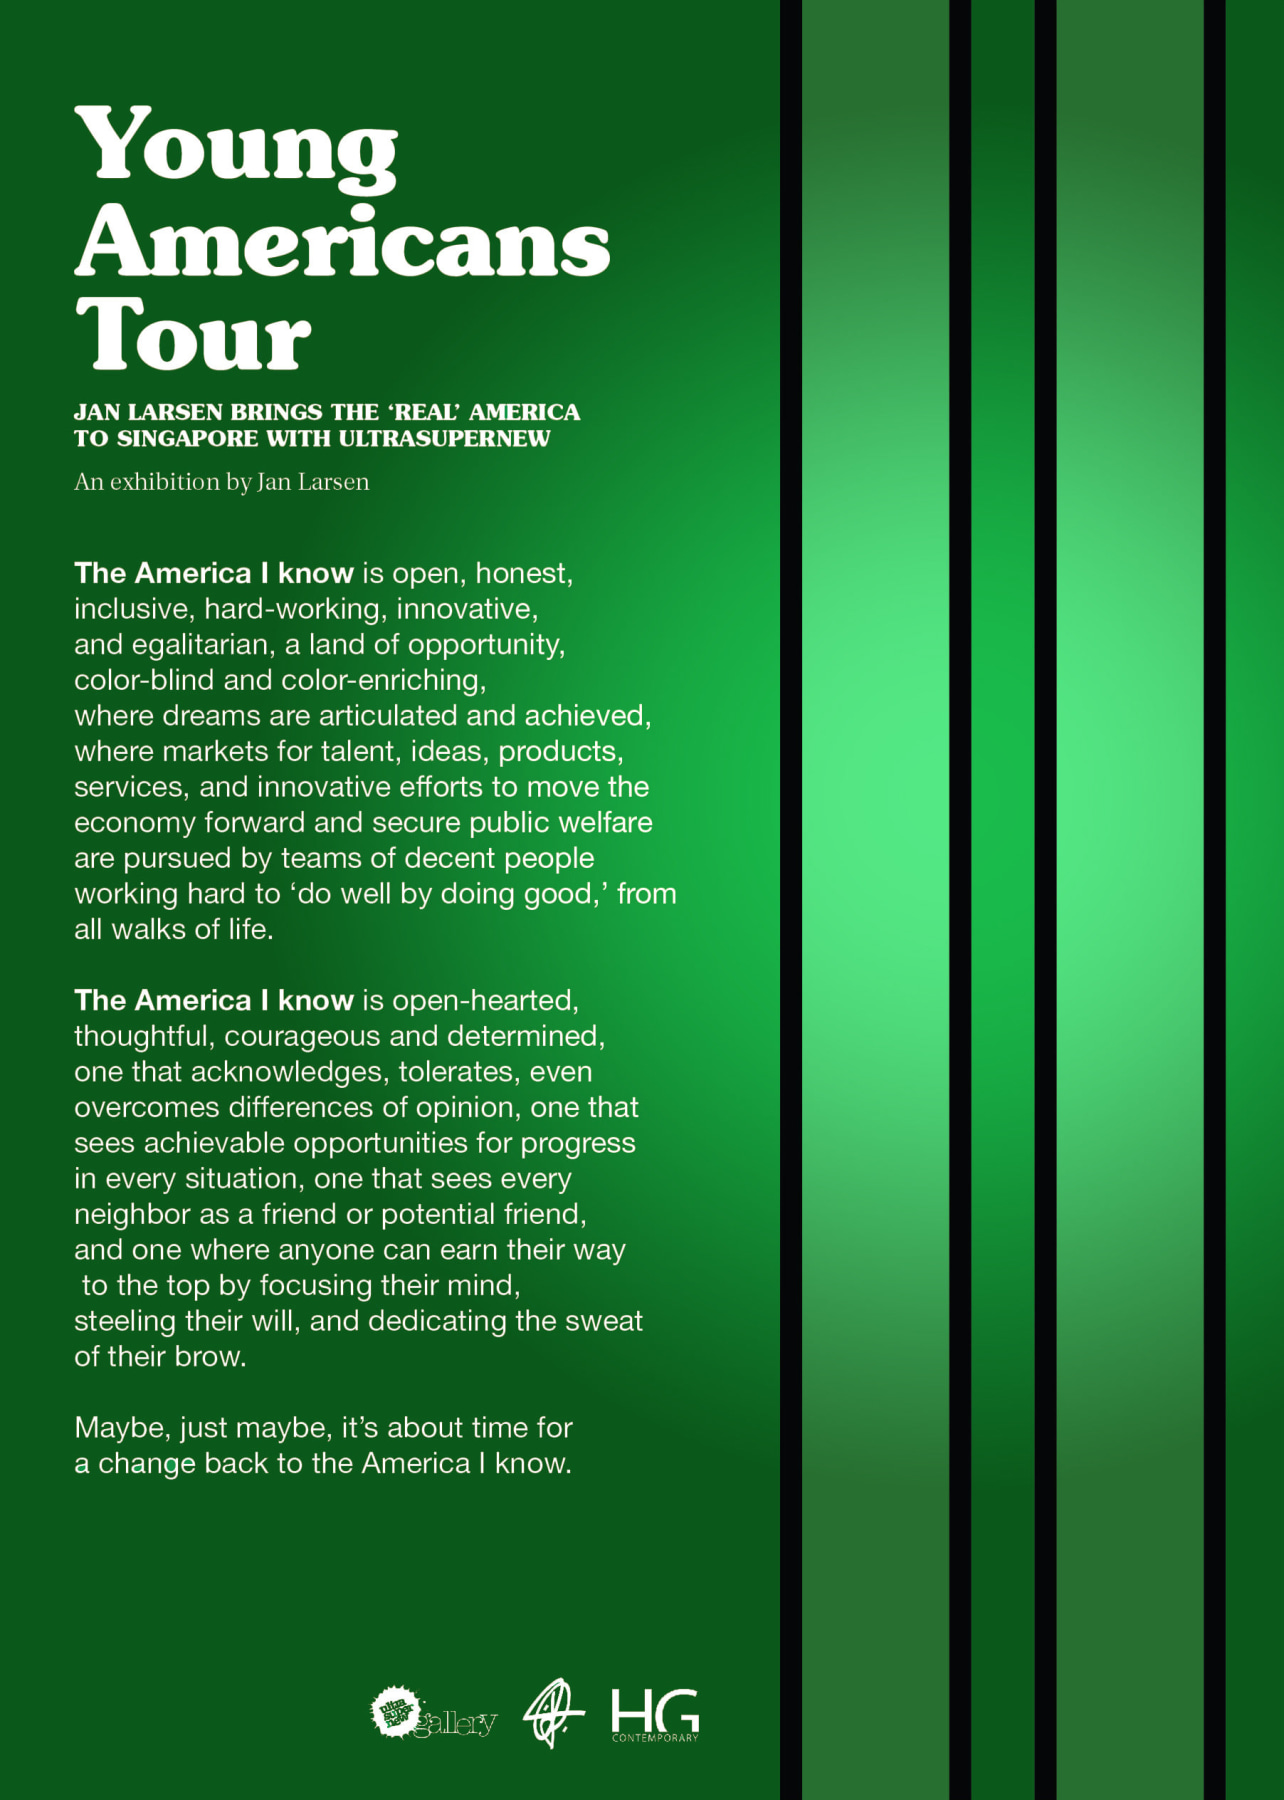 Young Americans Tour Poster at Hg Contemporary